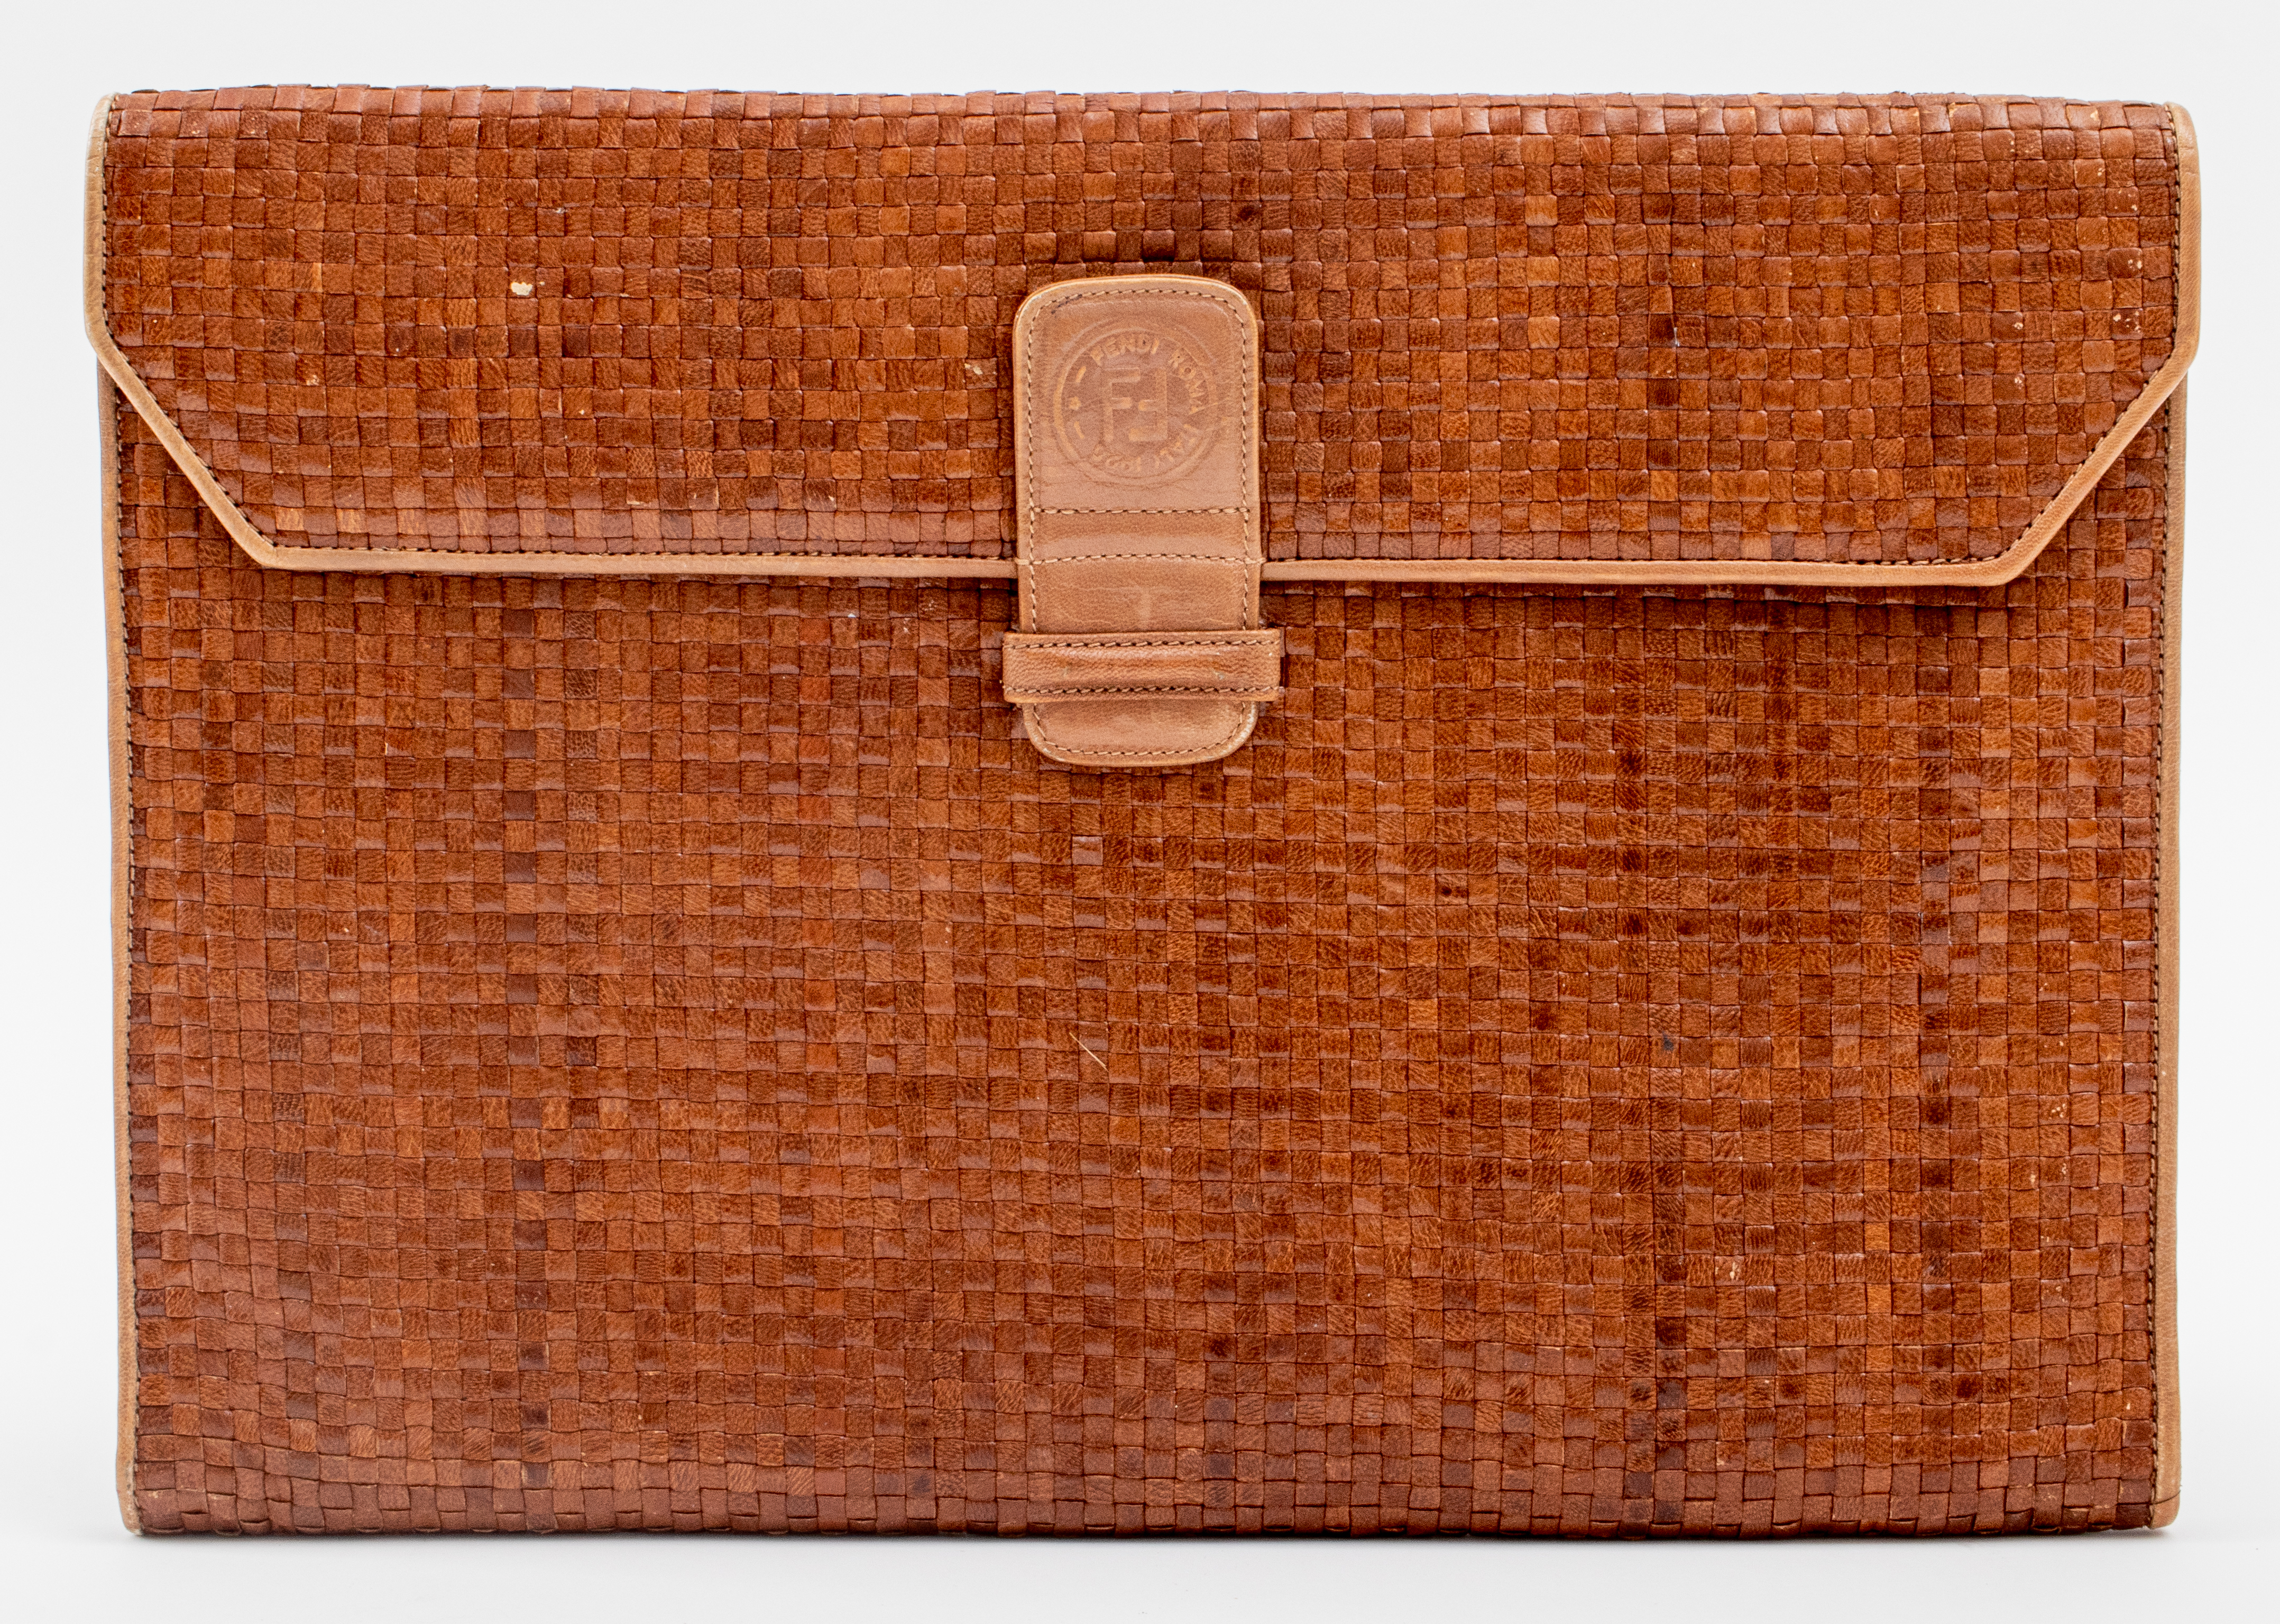 FENDI WOVEN LEATHER CLUTCH OR LAPTOP